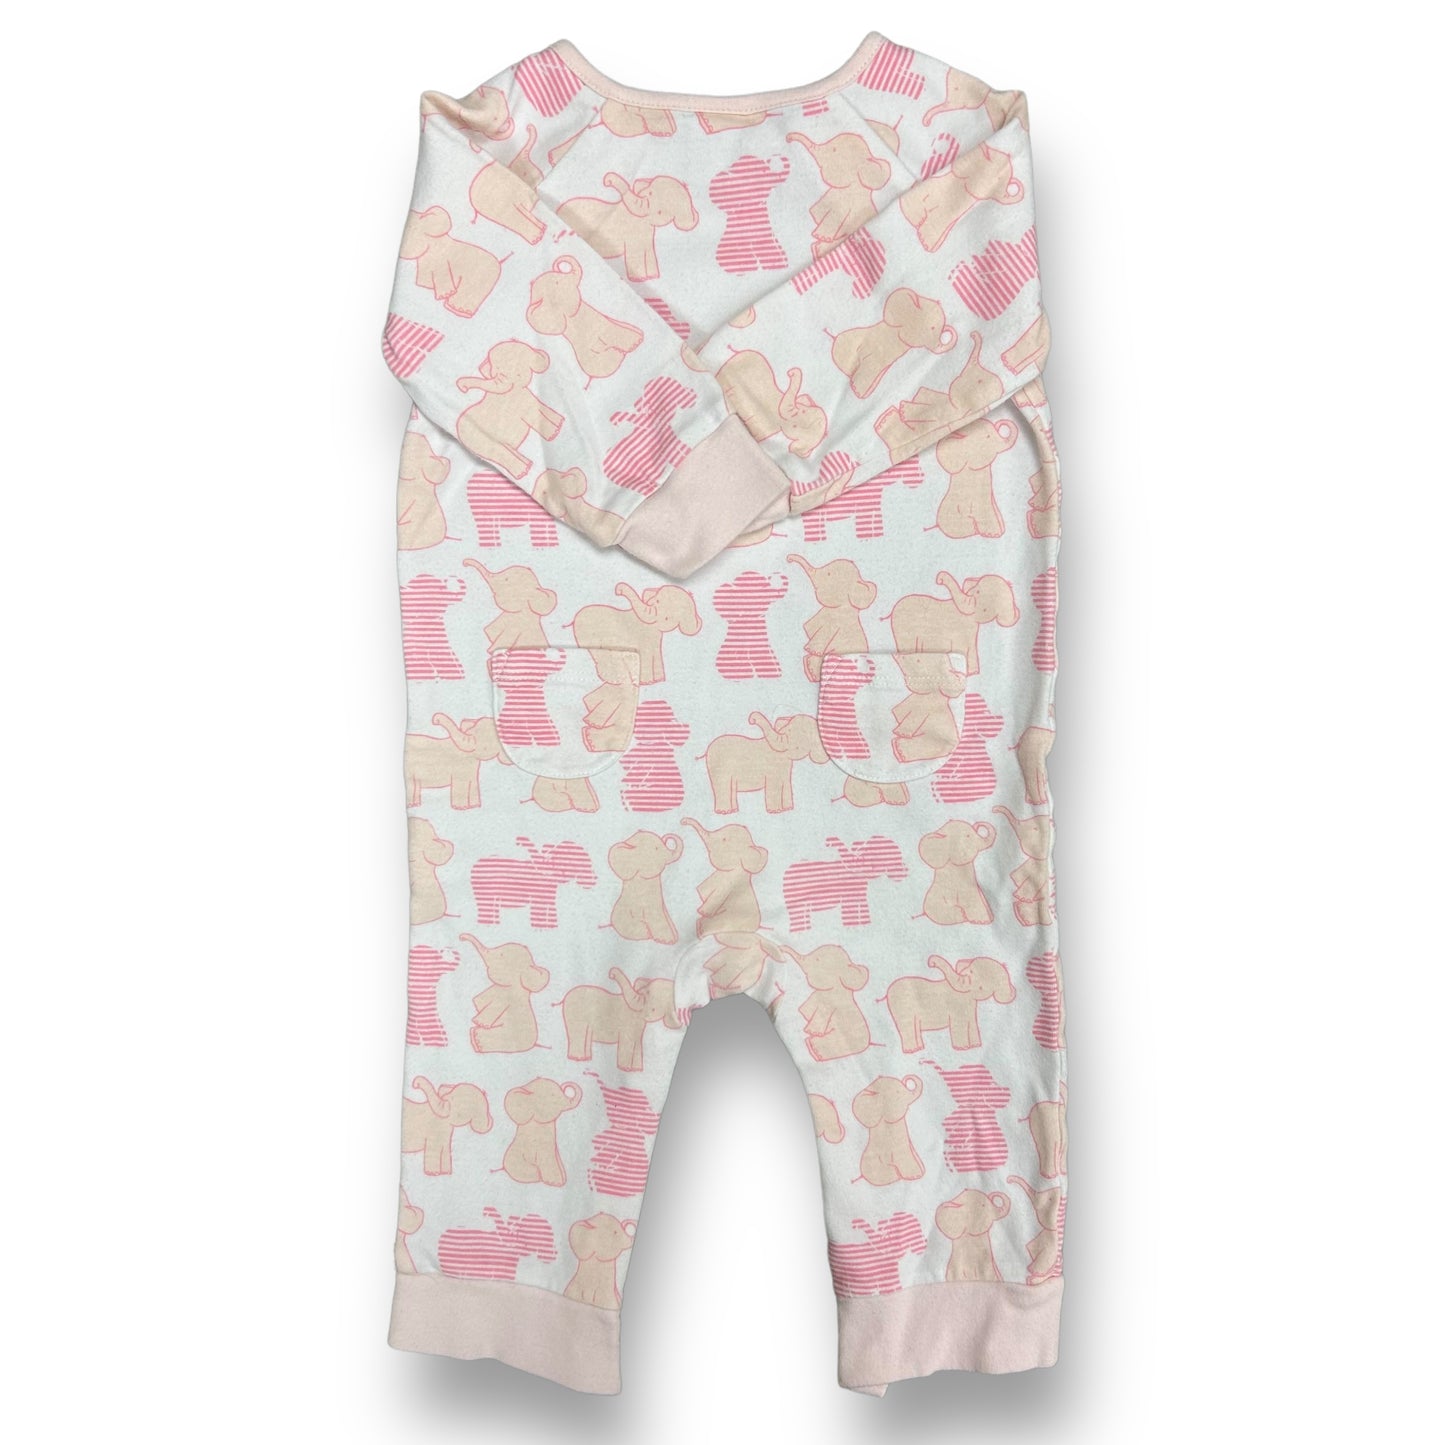 Girls Janie and Jack Size 6-12 Months Pink Elephant Snap Bottom Romper